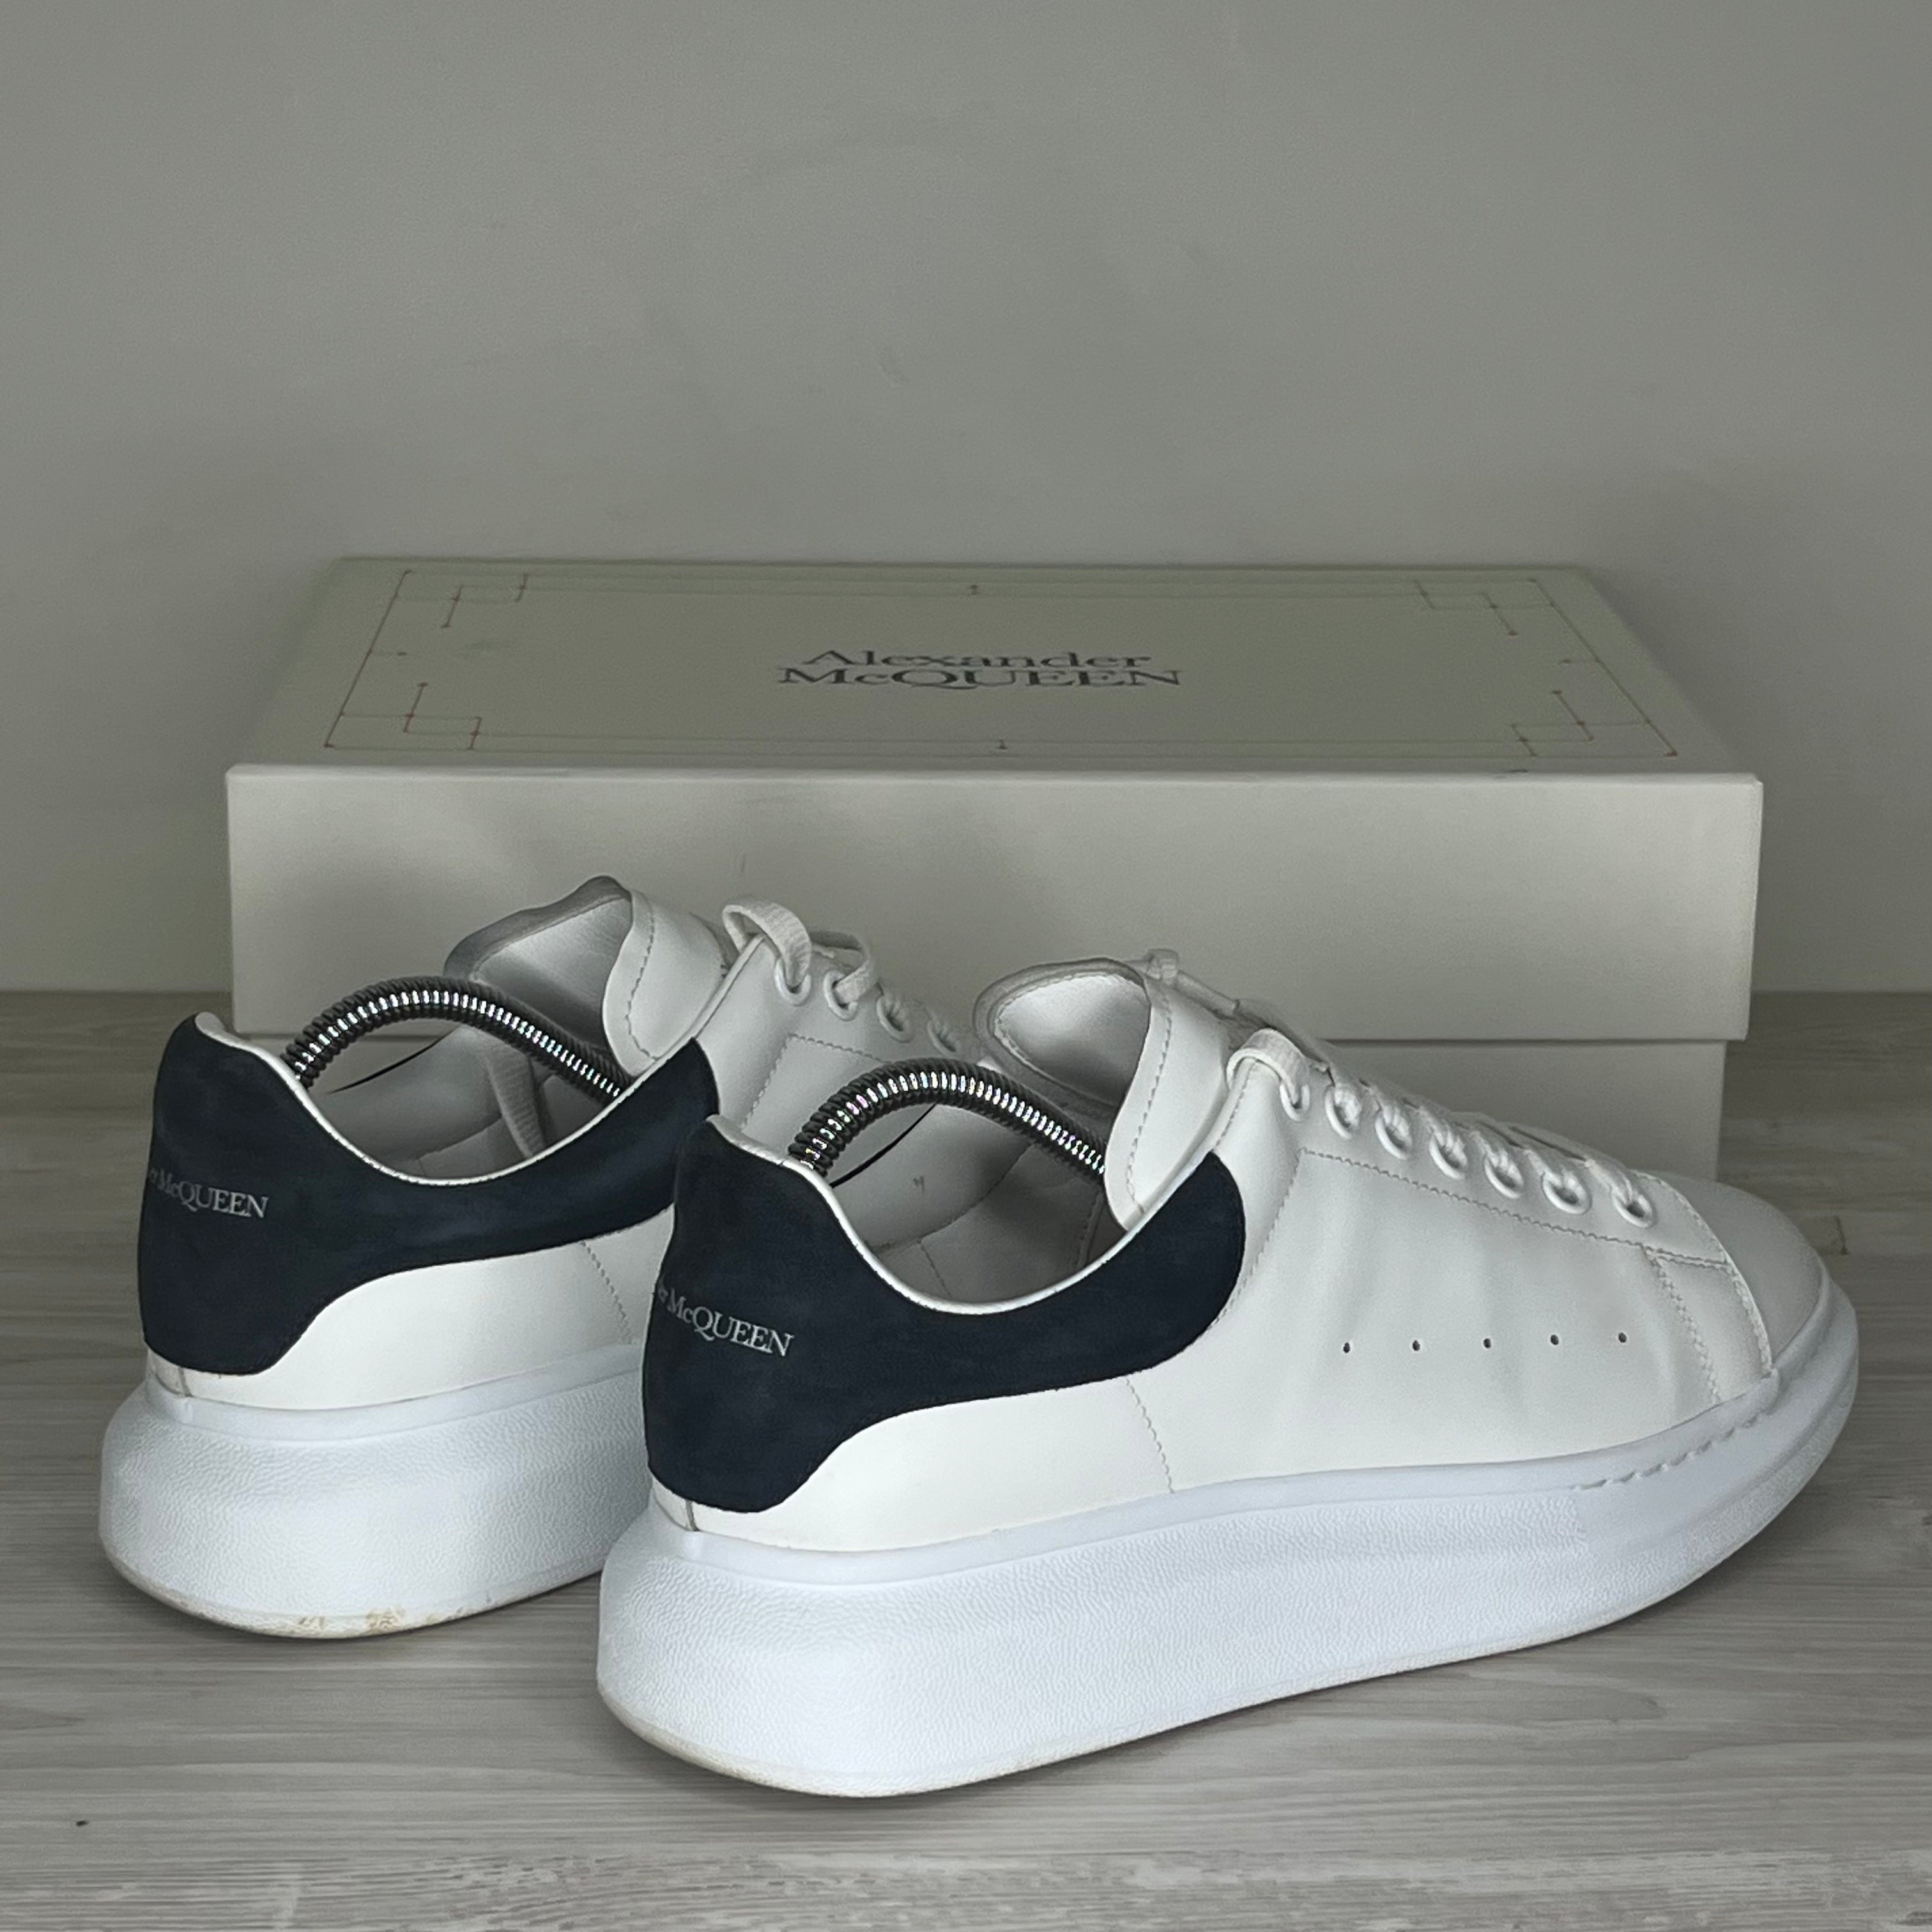 Alexander McQueen Sneakers, 'White Leather' Oversized (43.5)